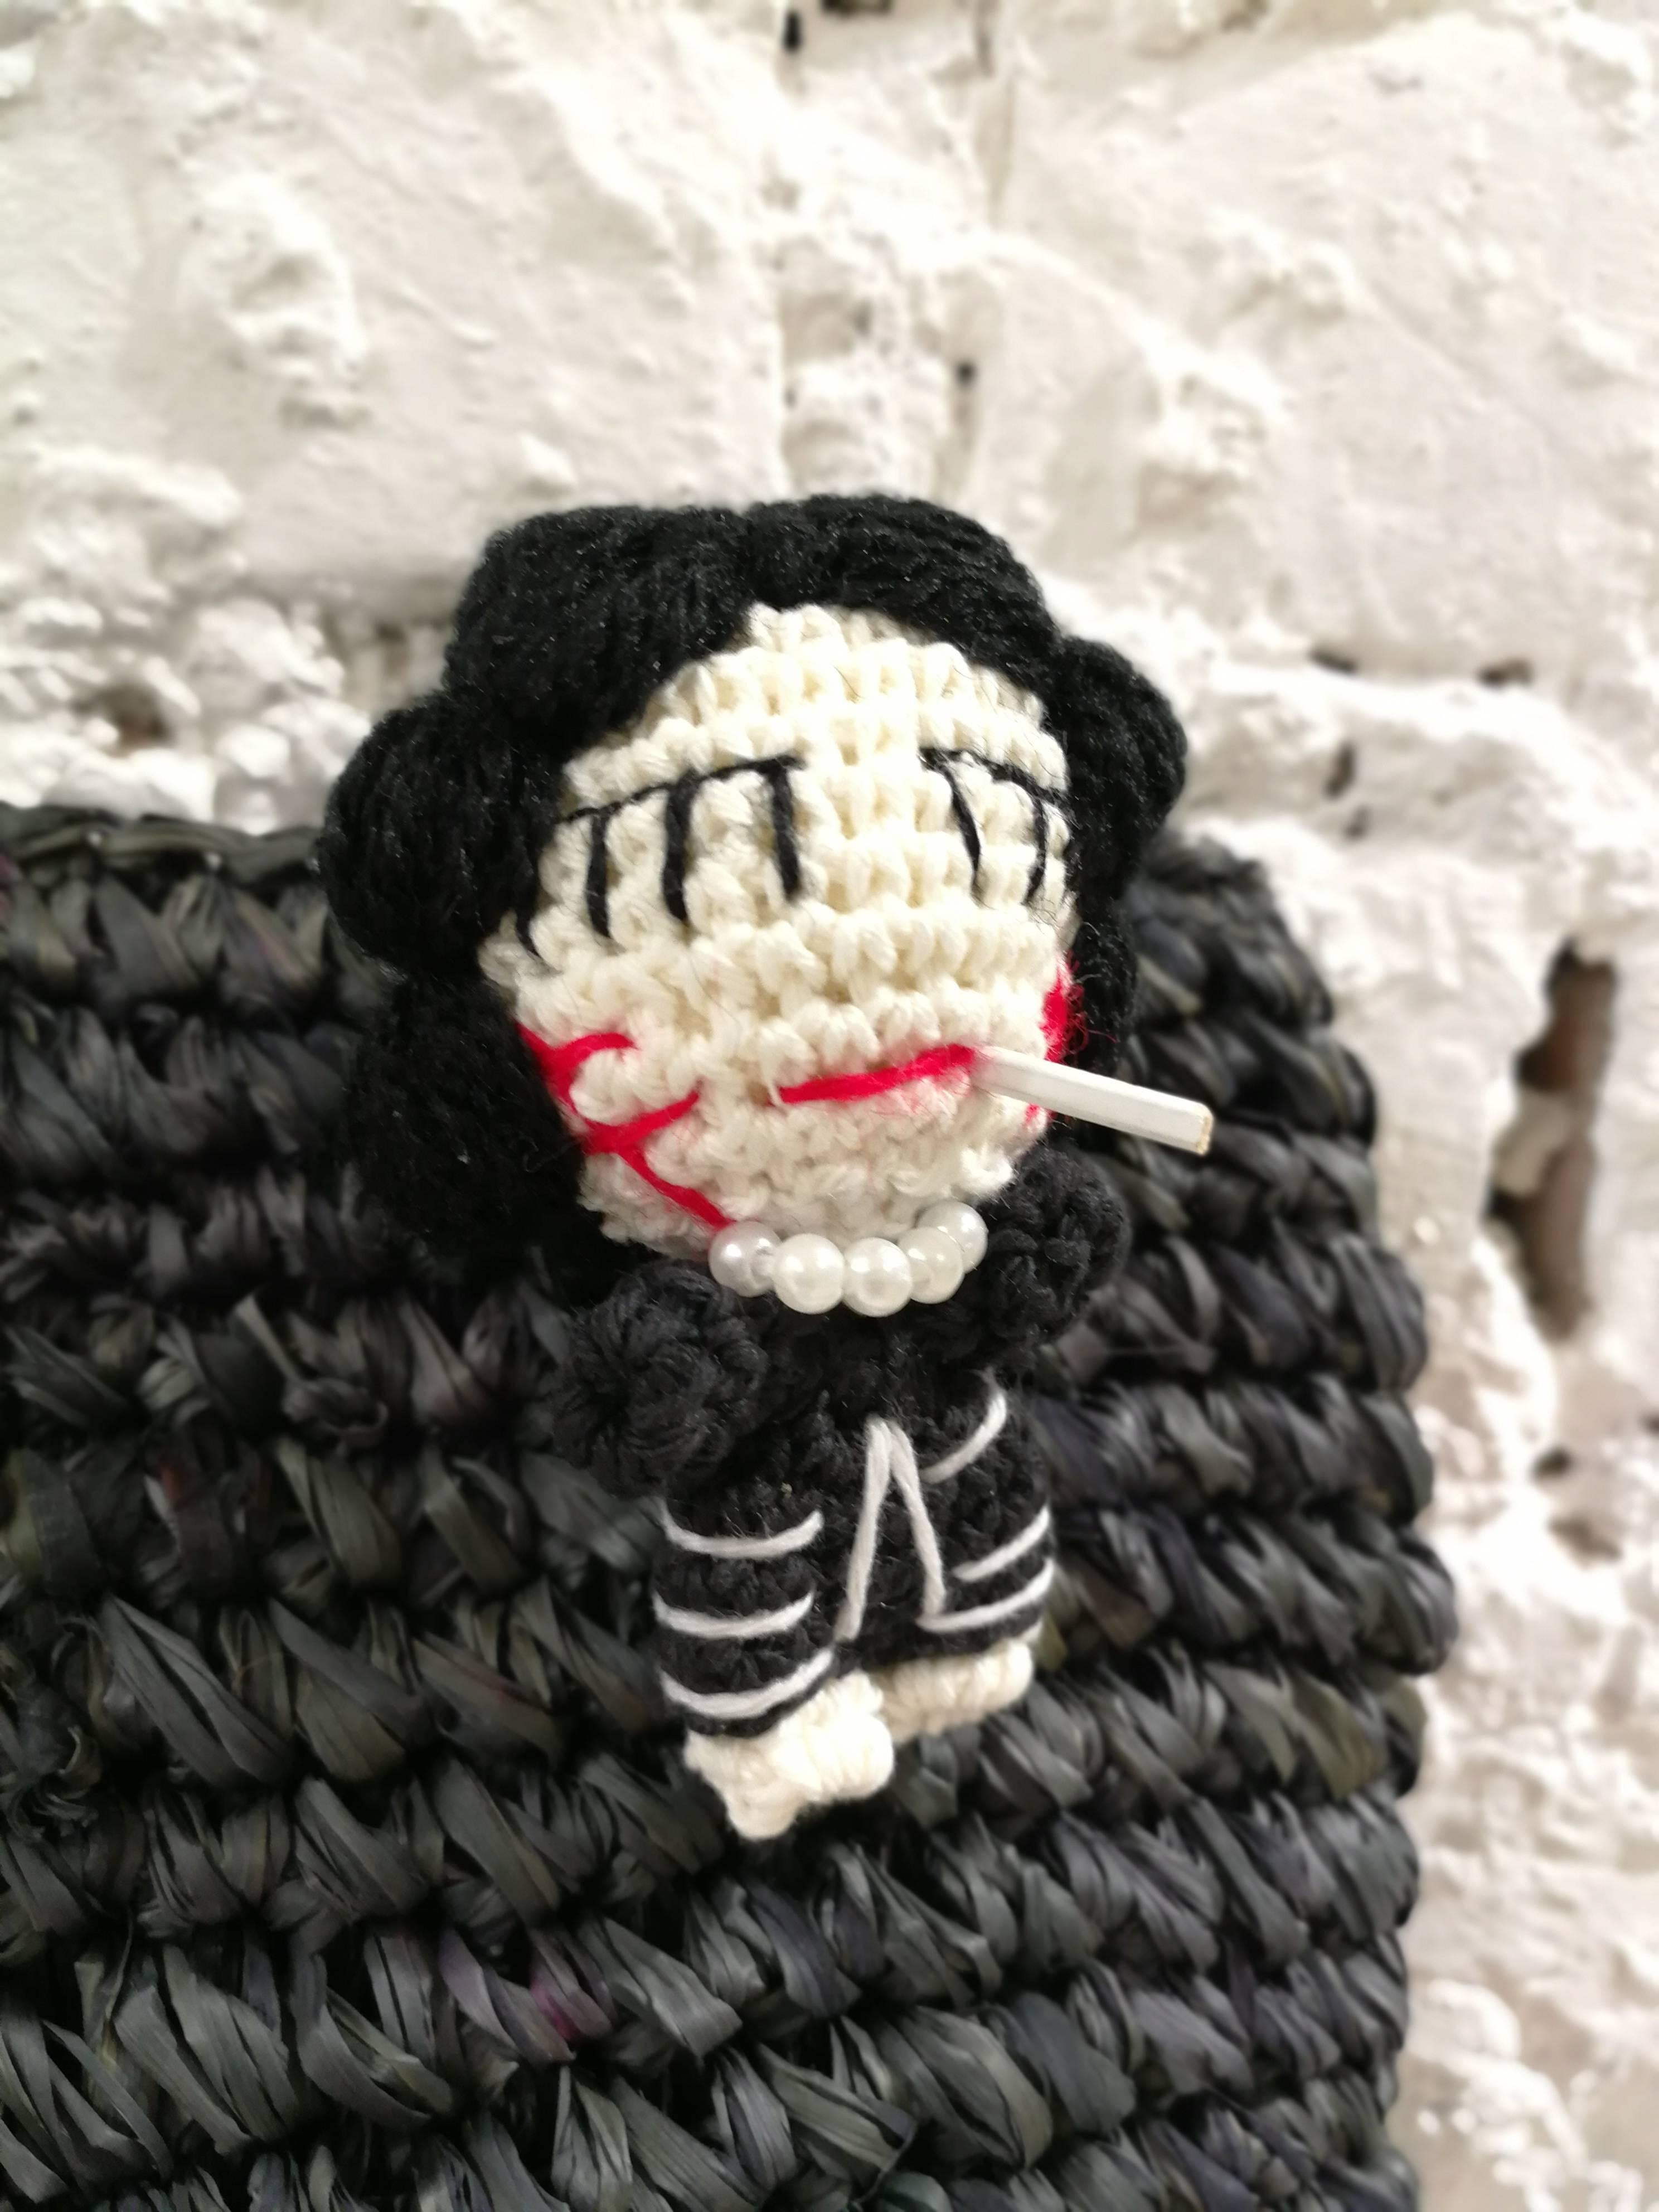 Mua Mua I Love Capri Raffia Black Clutch Pochette

Capsule just for this store in Capri 

Embellished with Coco Doll Brooch that can be removed and replaced wherever you prefer

Easy to wear especially during the summer season

Measurements: 30 *18